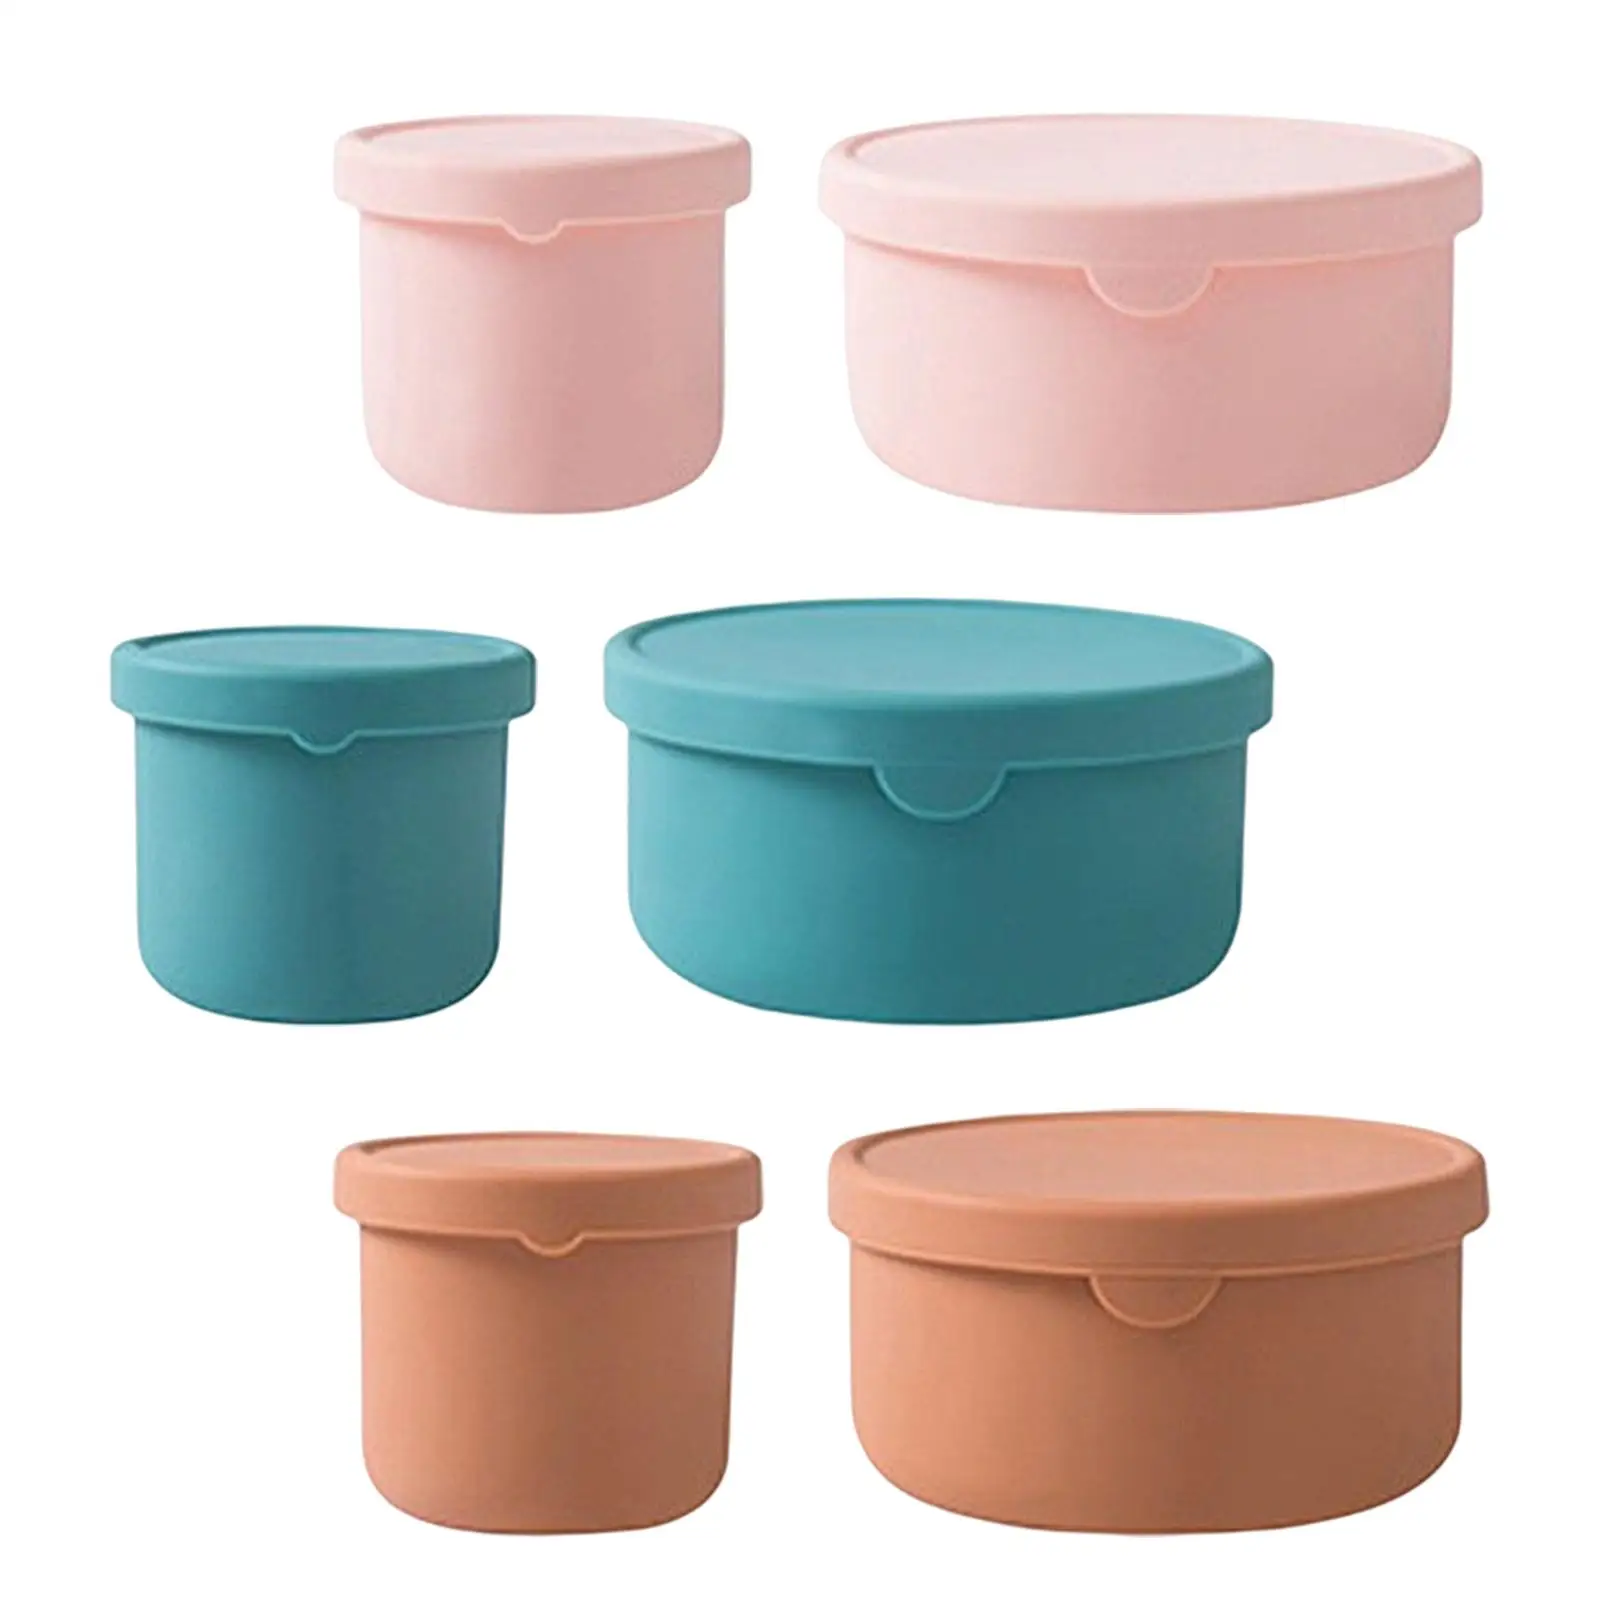 Silicone Box for Lunch, Food Storage Container with Lid, Kitchen Microwave Freezer and Dishwasher Storage